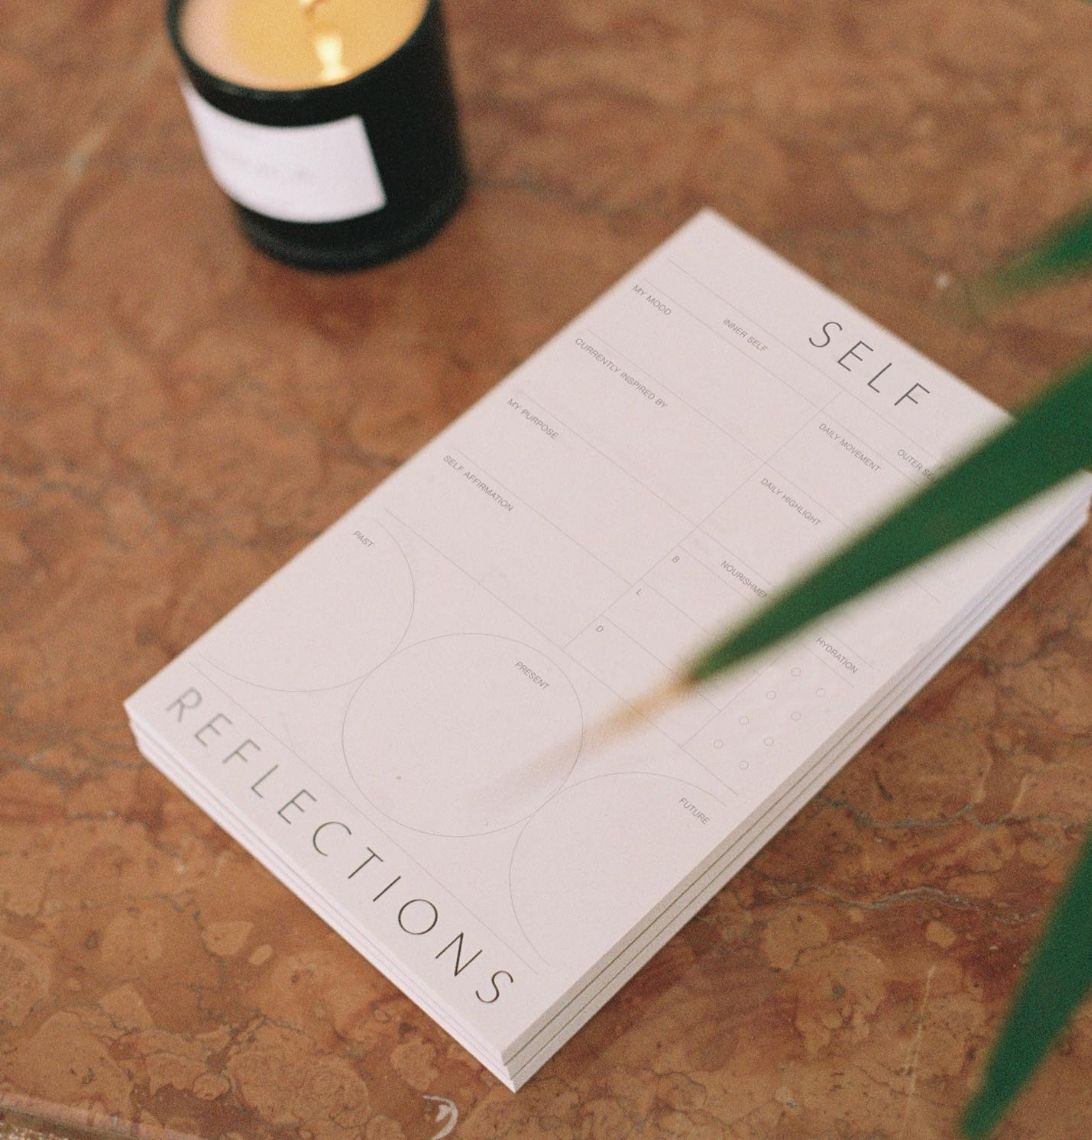 The New Moon’s Guide to Journaling, featuring Wilde House Paper’s Self Reflections Pad